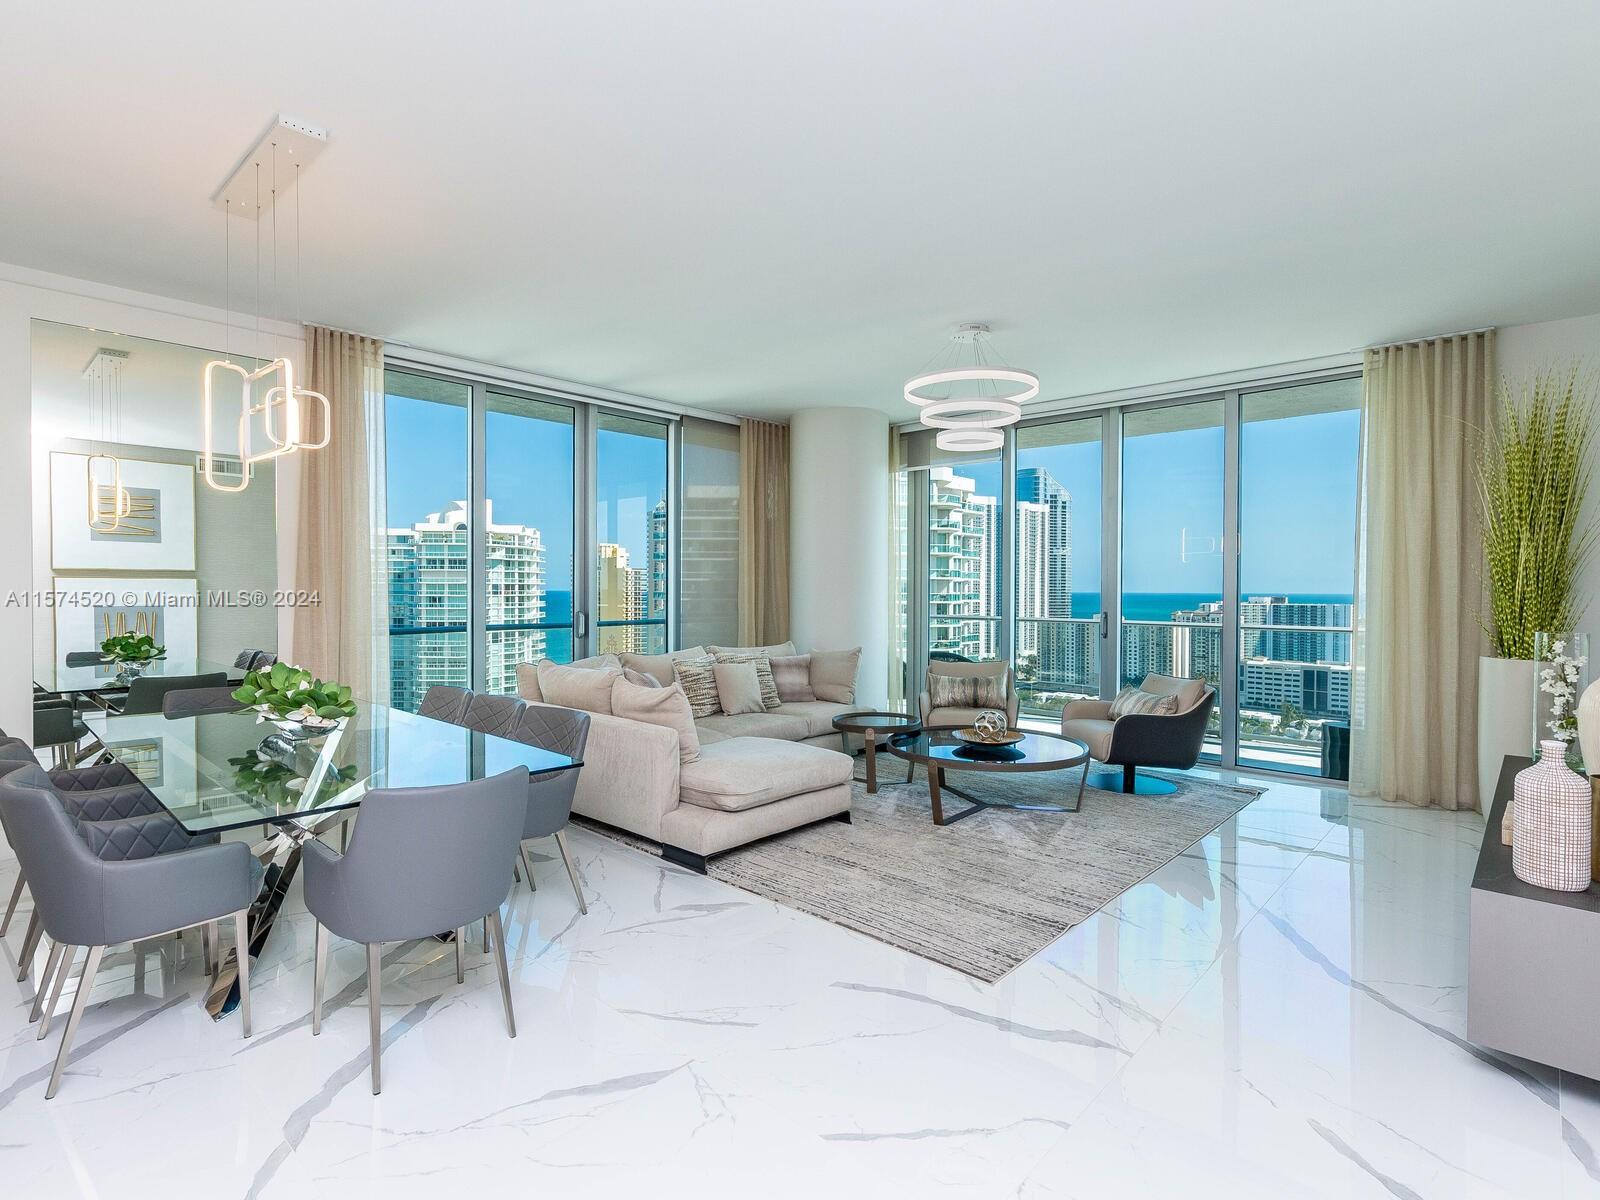 Fantastic furnished unit in Sunny Isles, close to the beach, with 5 stars amenities. Tastefully upgraded 3 bed/3.5 bath, corner unit, high floor and high ceilings, wrap around terrace with stunning panoramic views of Intracoastal, Miami skyline & Ocean. Designed by Steven G with finest furniture and beautiful decor and lots of upgrades.  Open floor plan, floor to ceiling Impact glass windows & doors. Gourmet kitchen, quartz Countertops, induction stove, Italian cabinetry, Bosh & Subzero appliances, Italian closest and doors, electric blinds, beautiful porcelain floors. Luxurious amenities:24/7 front desk & Valet, 4 pools, Gym, Spa, Kids Club & Playground, Cinema, Games room, Bistro, Party room. Near the beach, Aventura Mall & Bal Harbor Mall. Awesome​​‌​​​​‌​​‌‌​‌‌‌​​‌‌​‌‌‌​​‌‌​‌‌‌ Schools.